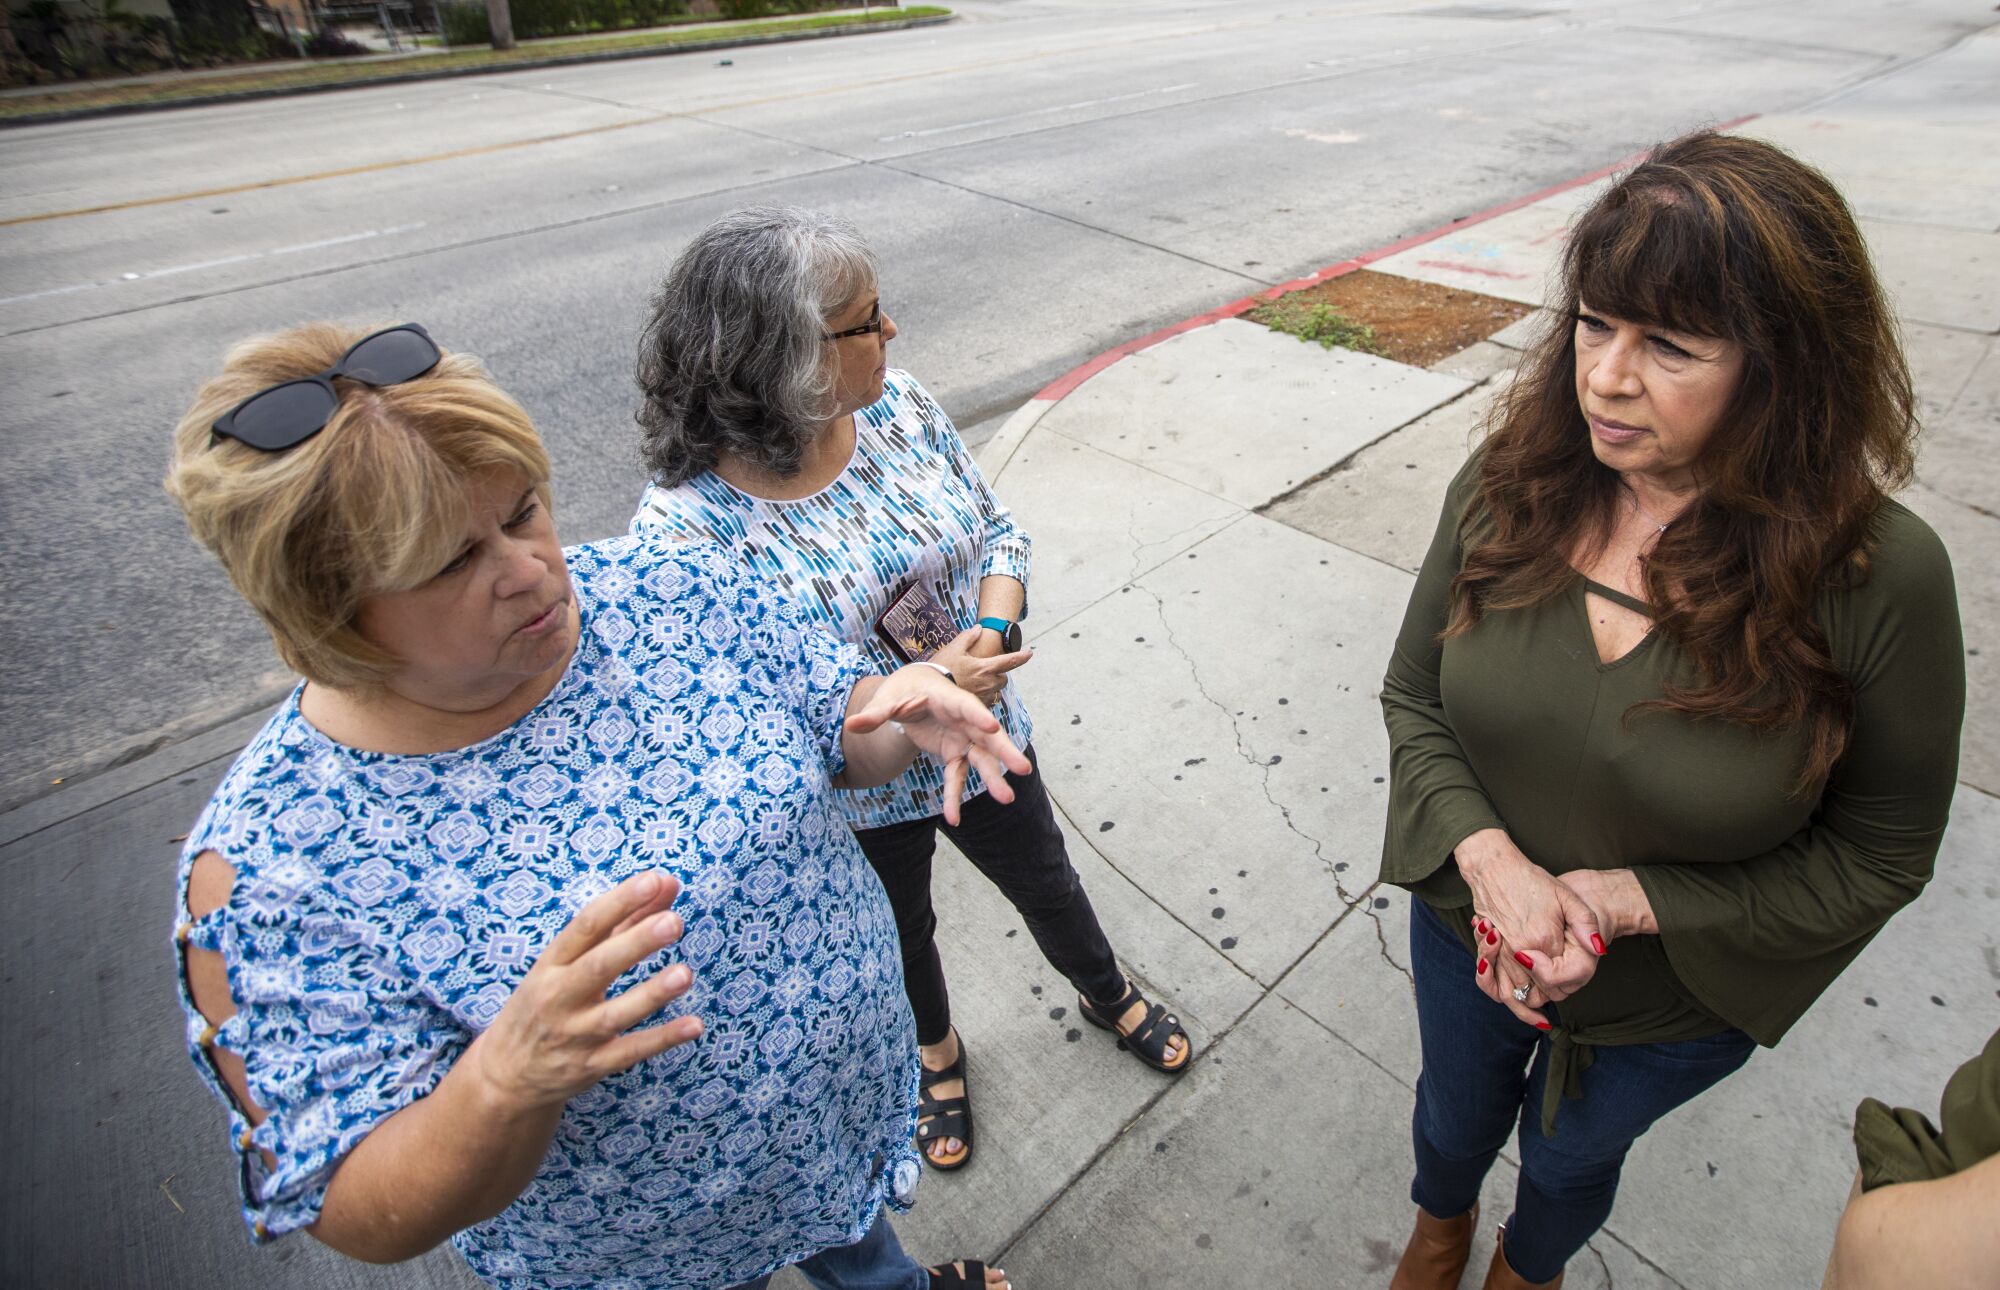 Three women stand near the area where their former classmate Jan Marsh used to frequent before her death at age 14.